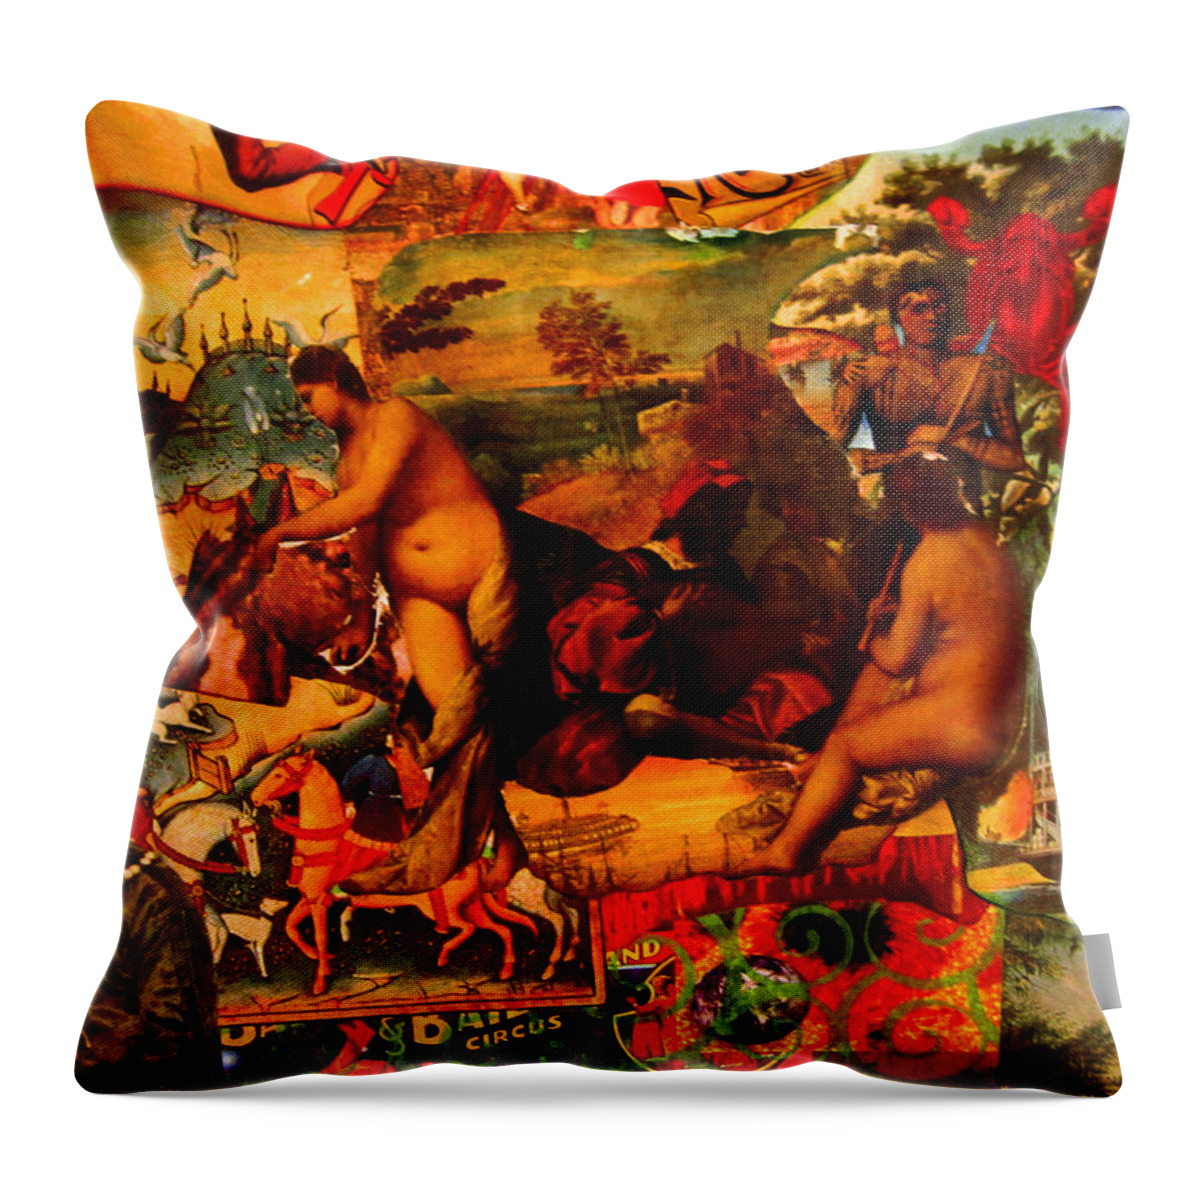  Throw Pillow featuring the painting Down By The River by Steve Fields